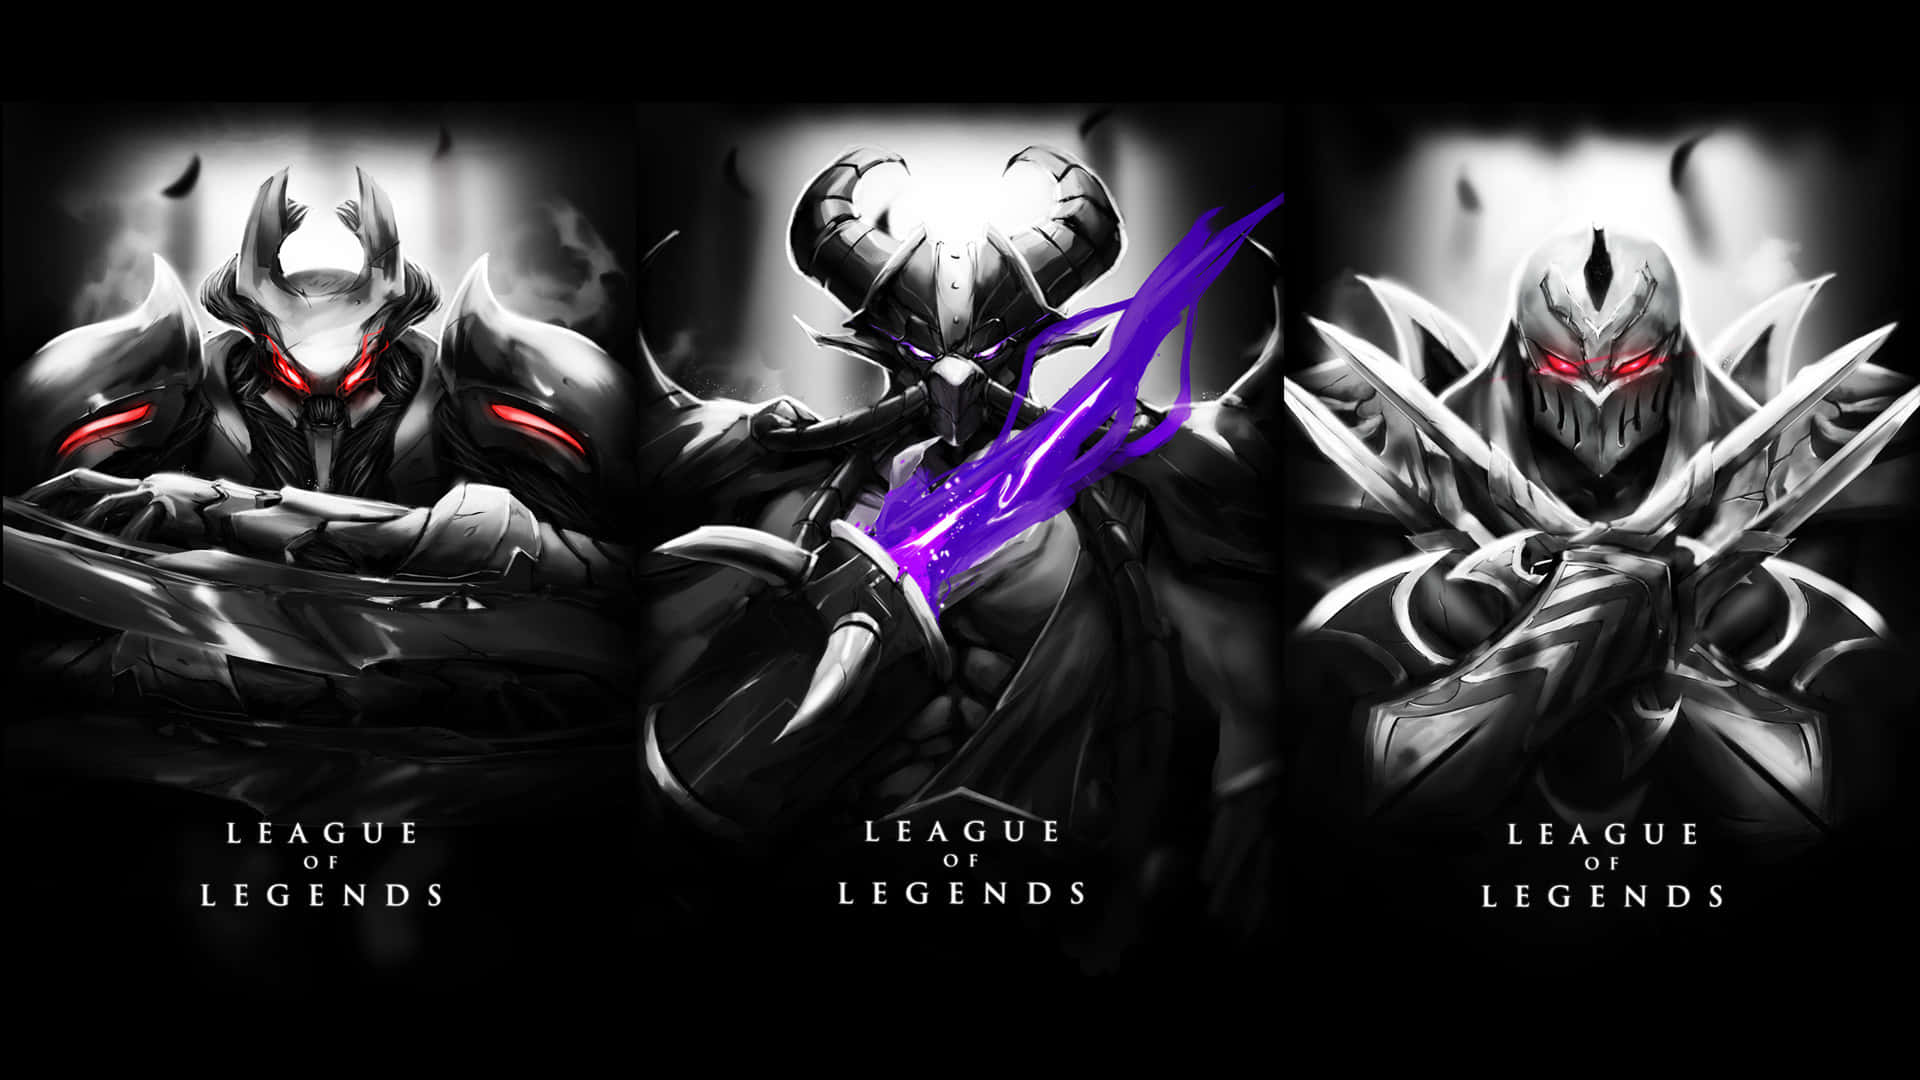 Conquer the Summoner's Rift and Become the Best League of Legends Player